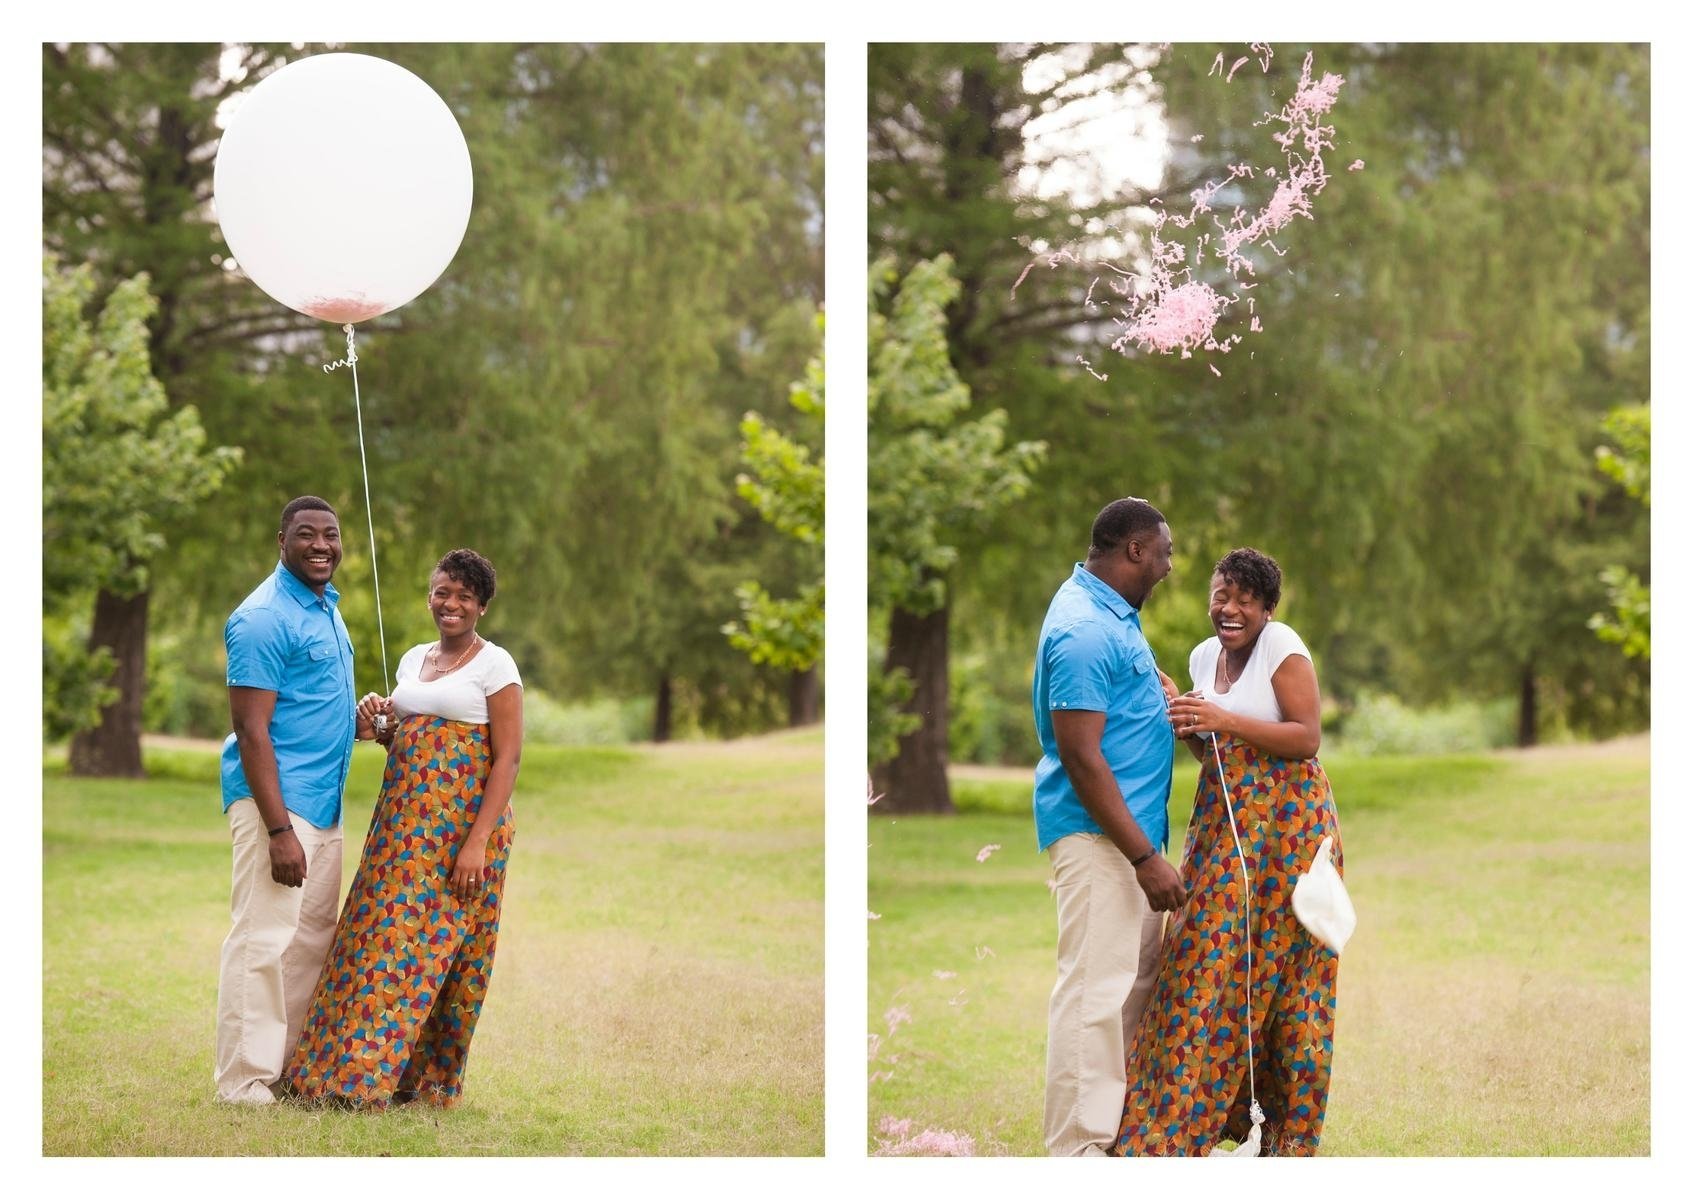 10 Elegant Gender Reveal Ideas For Family gender reveal ideas cute ways expectant couples shared the news 4 2022